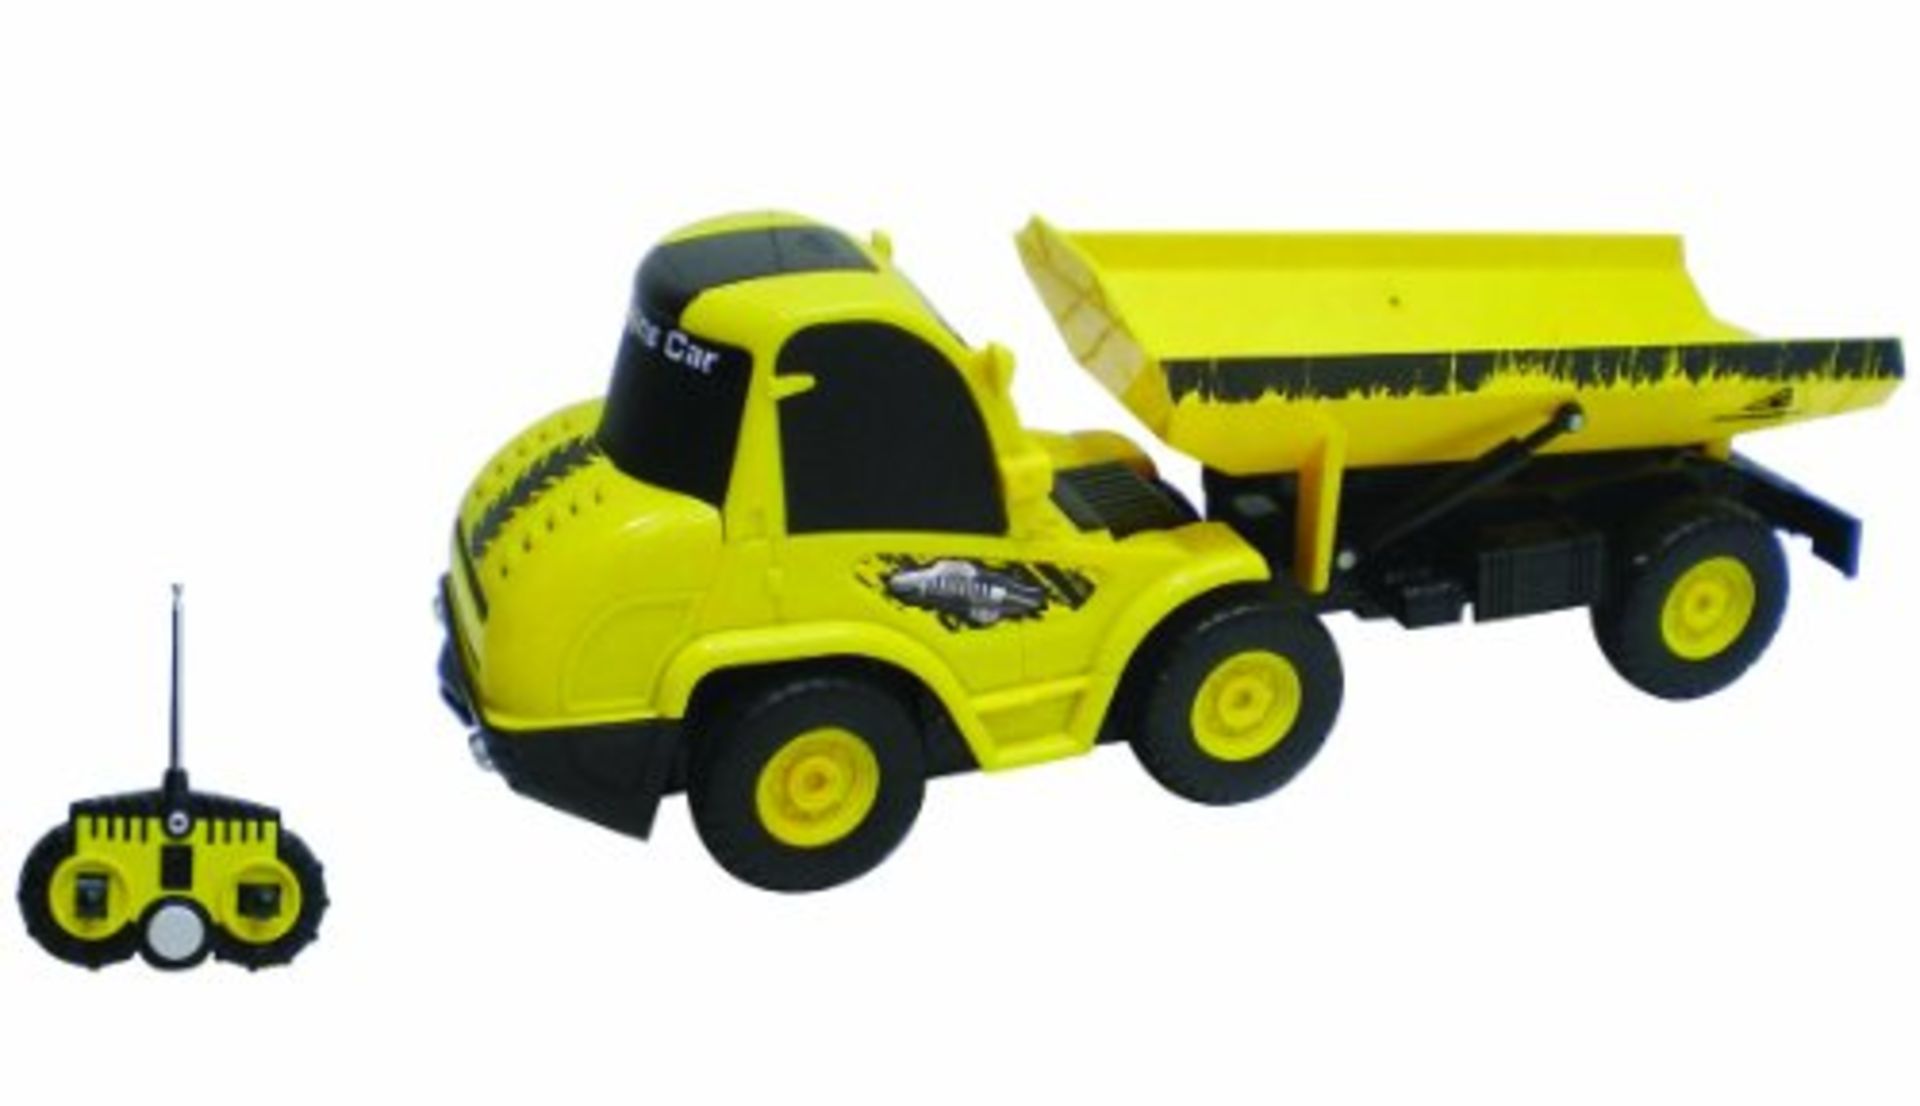 V Brand New 1:20 Remote Control Construction Tipper Vehicle